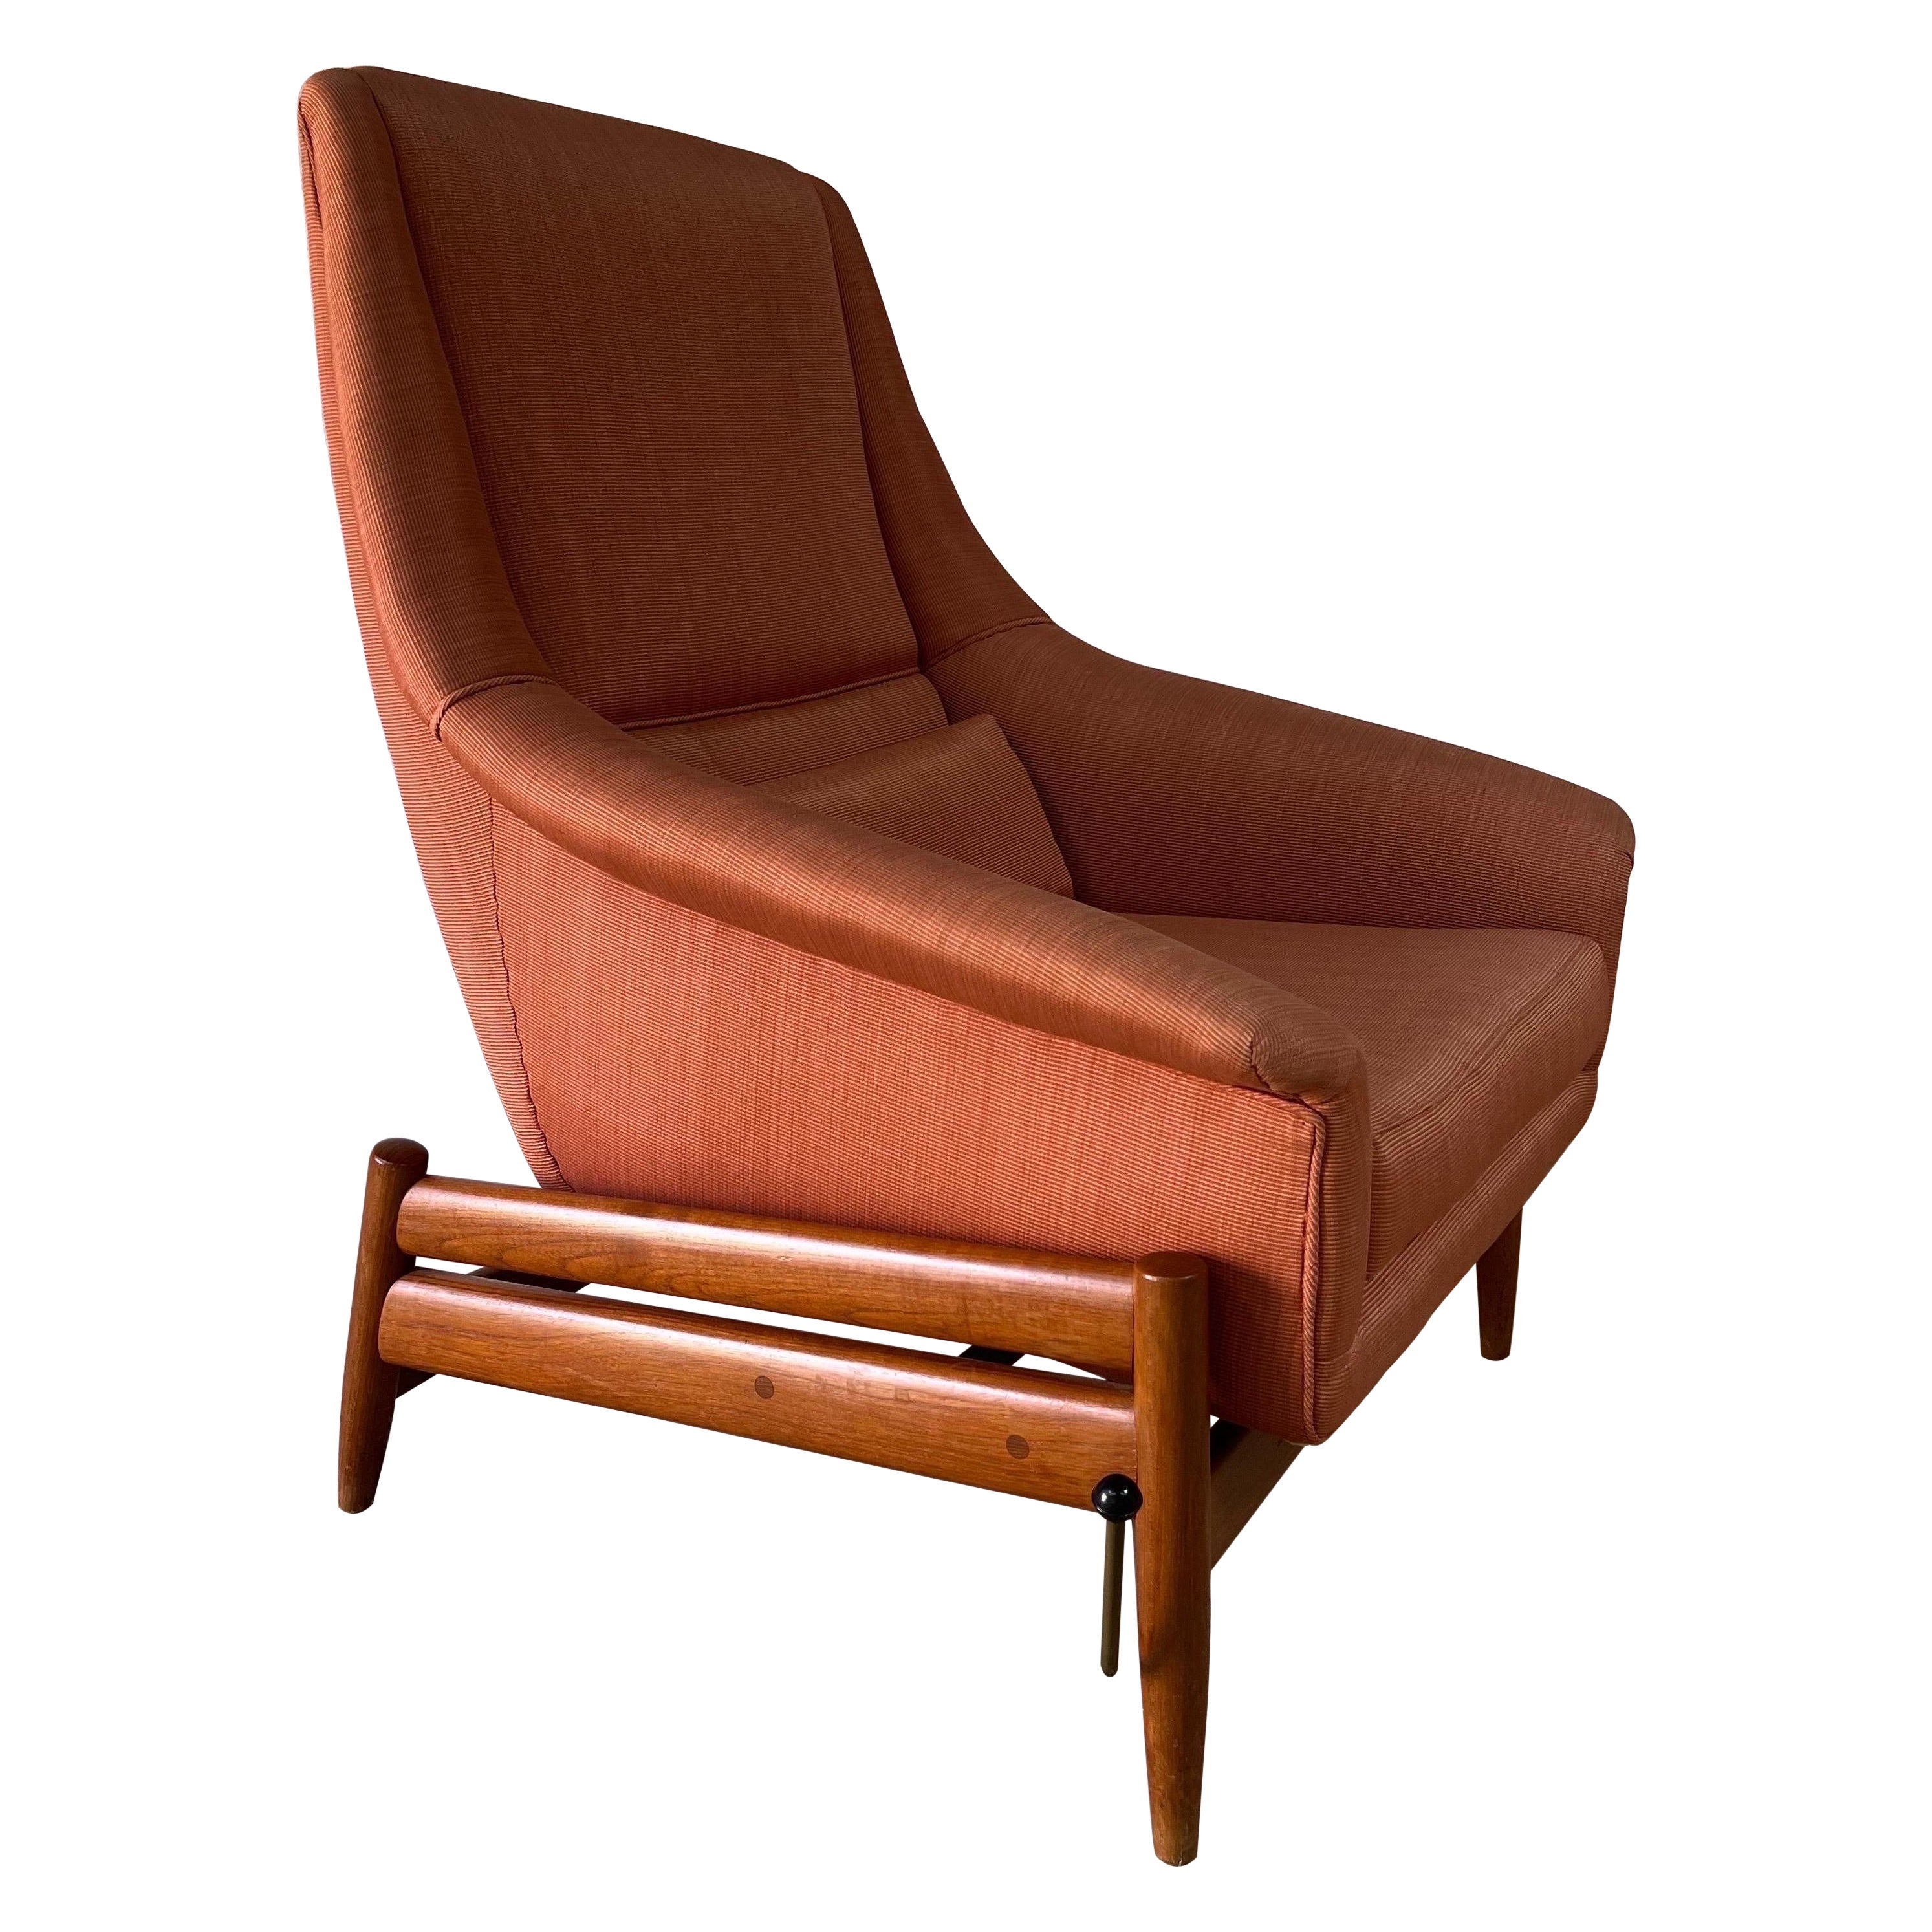 Recliner by L.K. Hjelle, Norway circa 1960’s